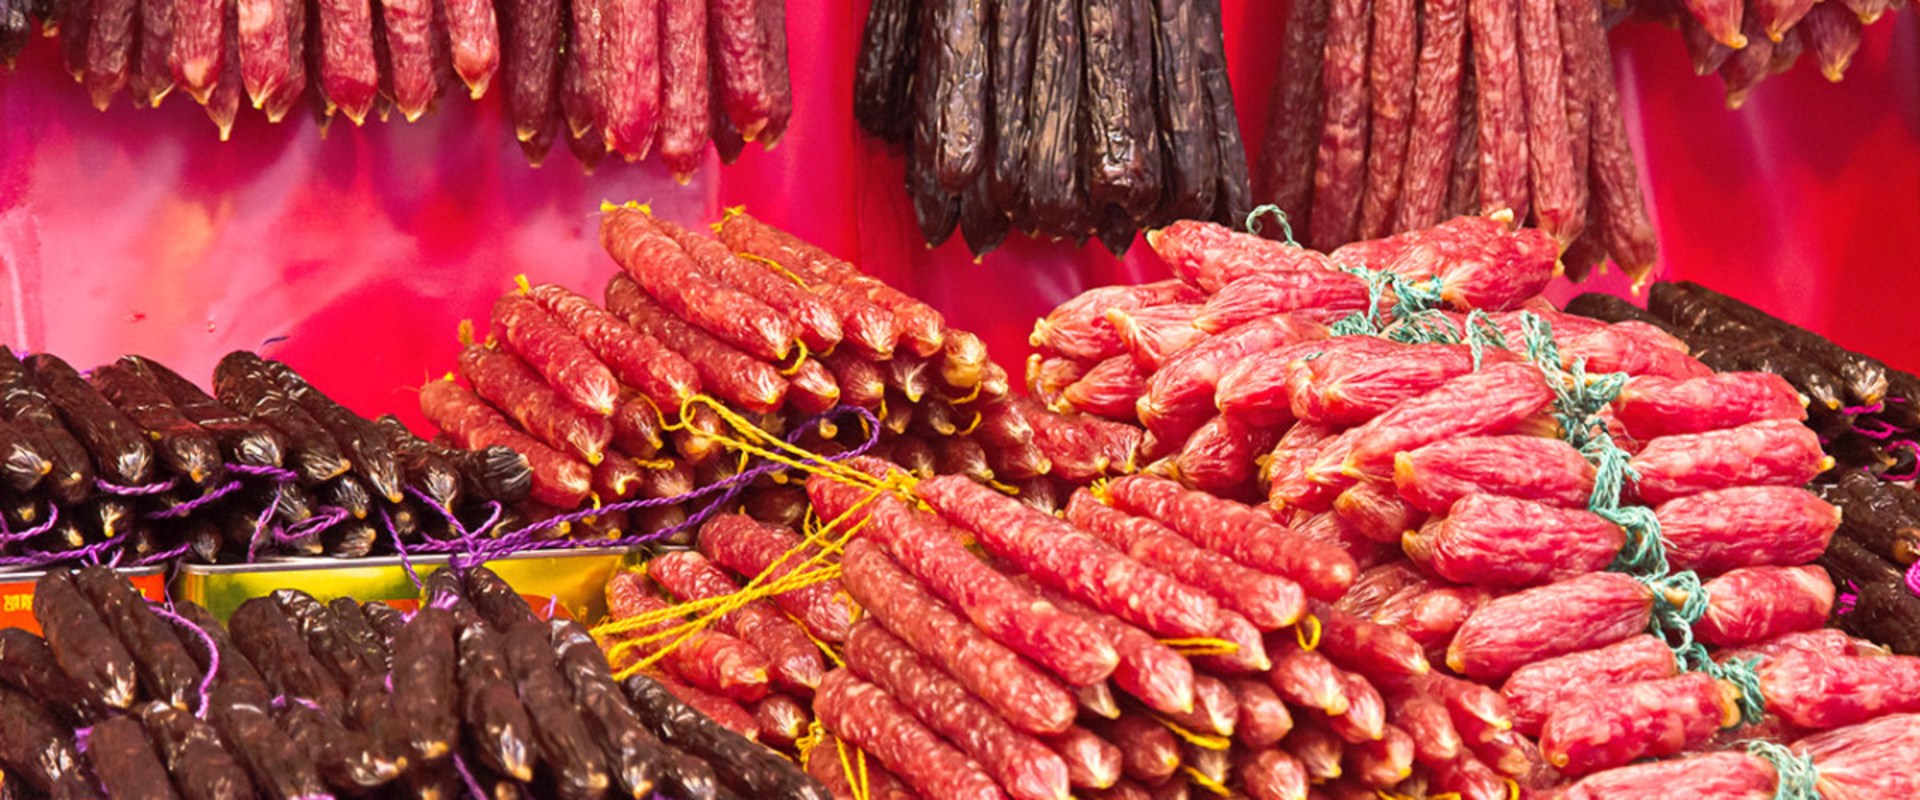 Where to buy Best Chinese Sausage in Singapore?